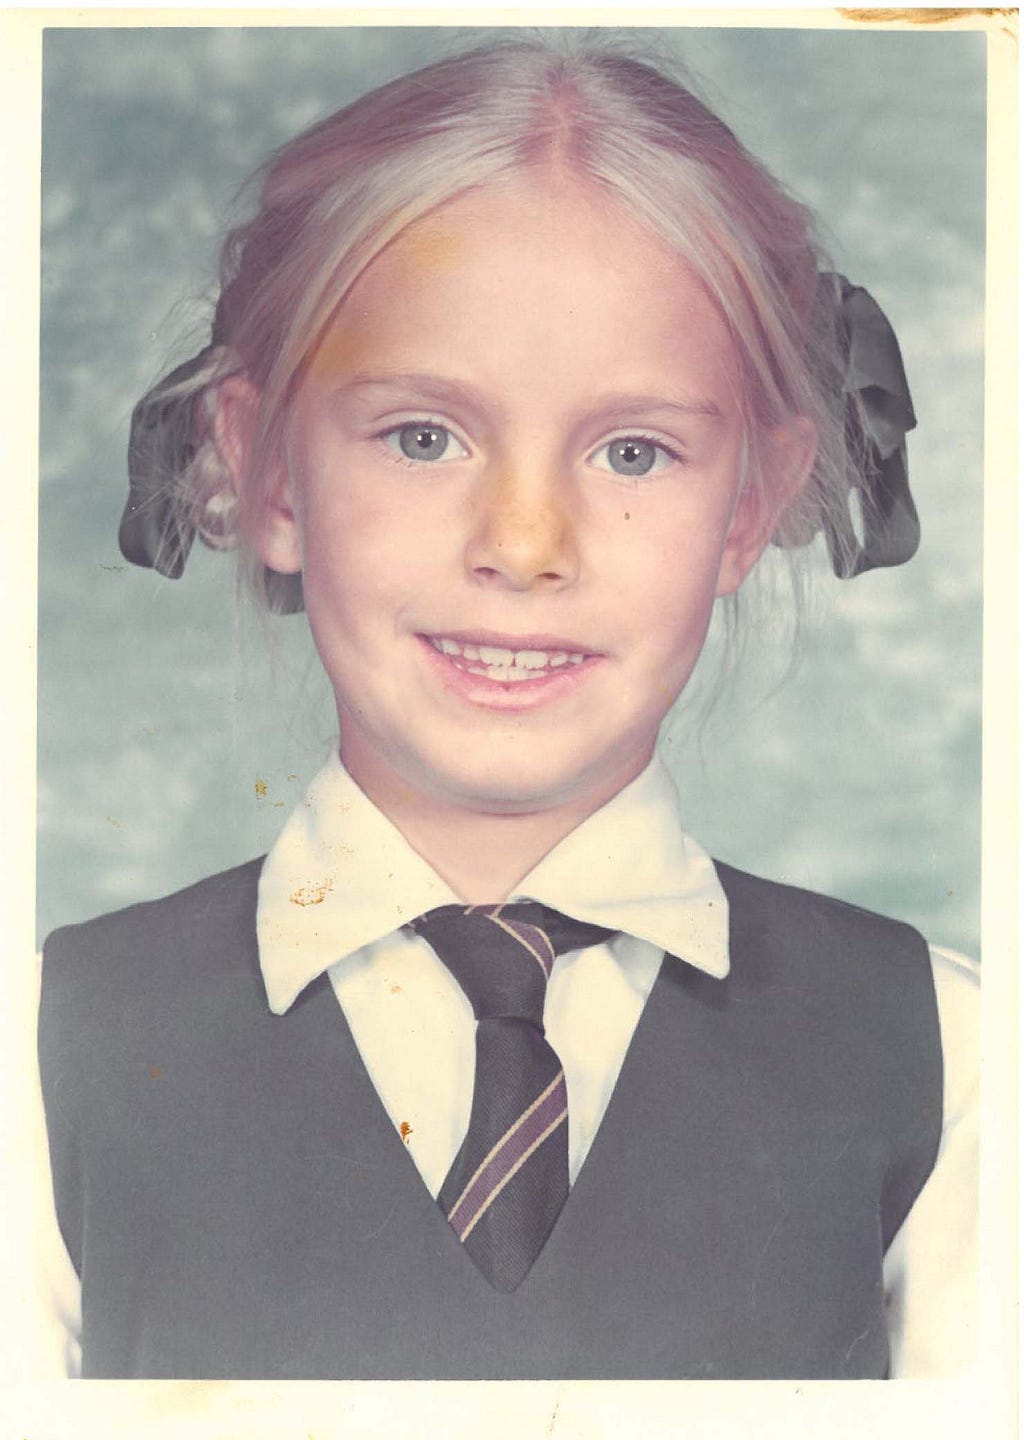 A school picture of the author’s mother as a young girl